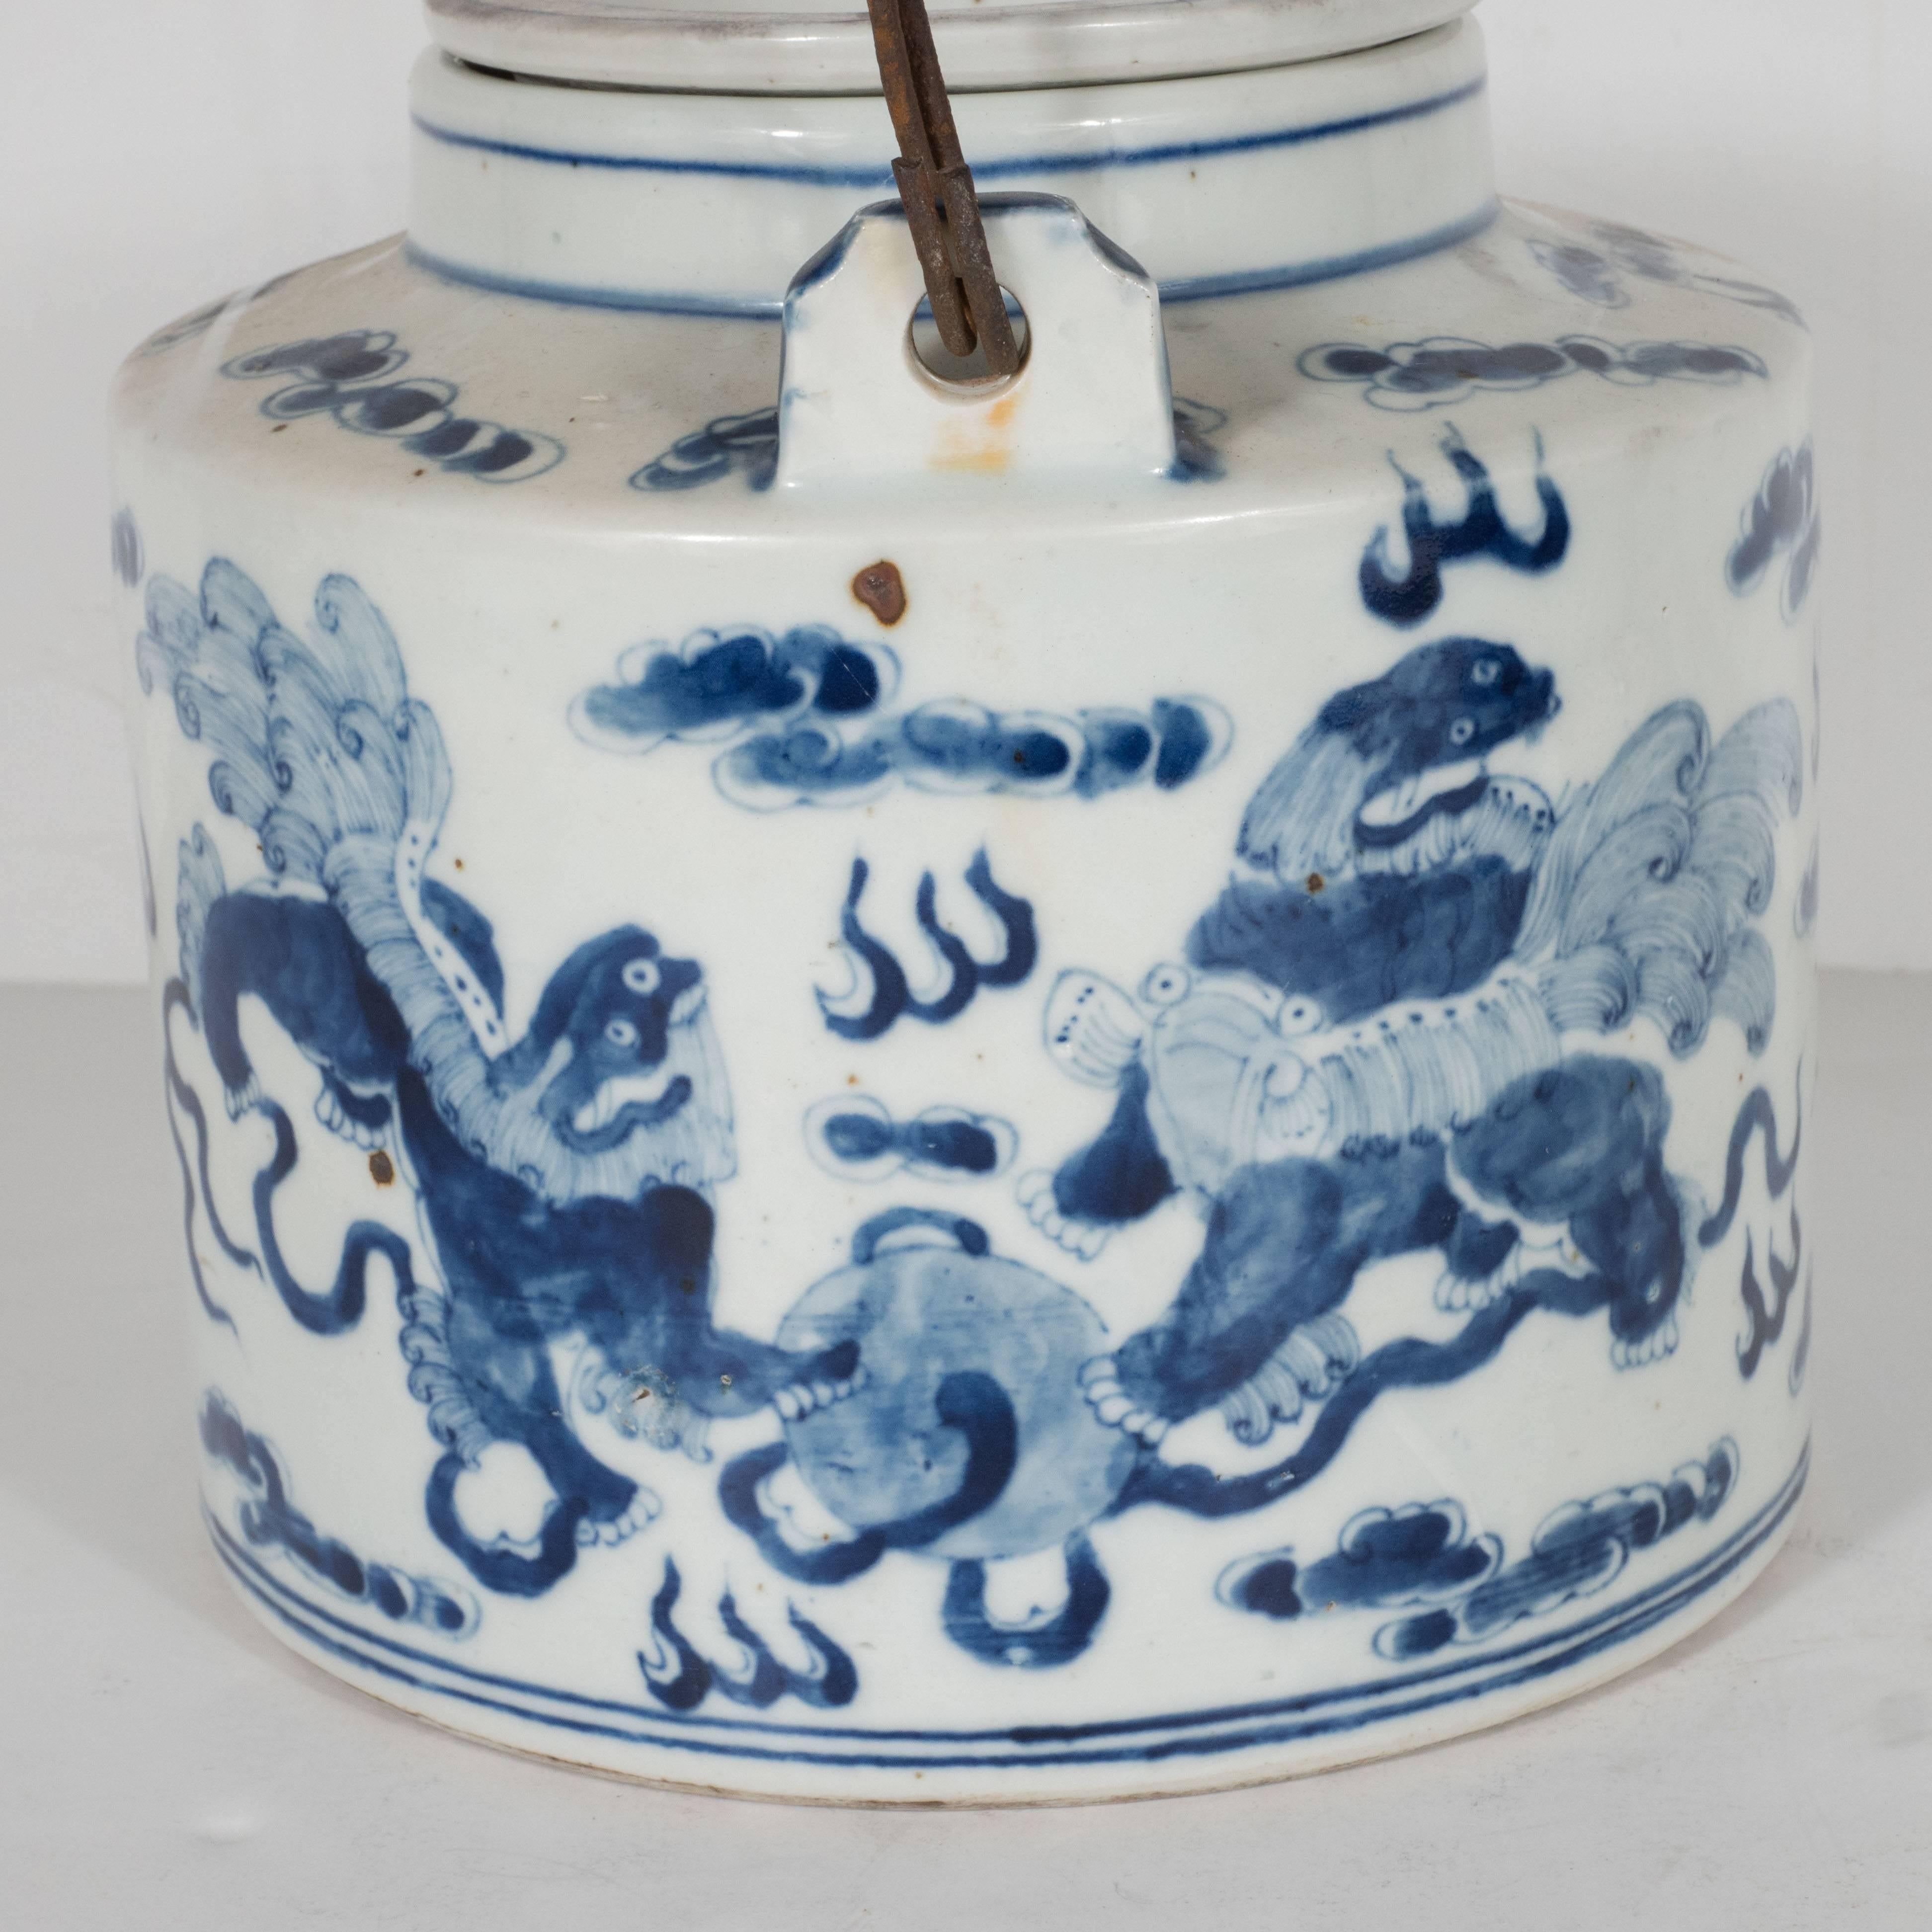 Exquisite Chinese Delft Tea Pot 19th Century with Temple Guardian Lions Motif 1